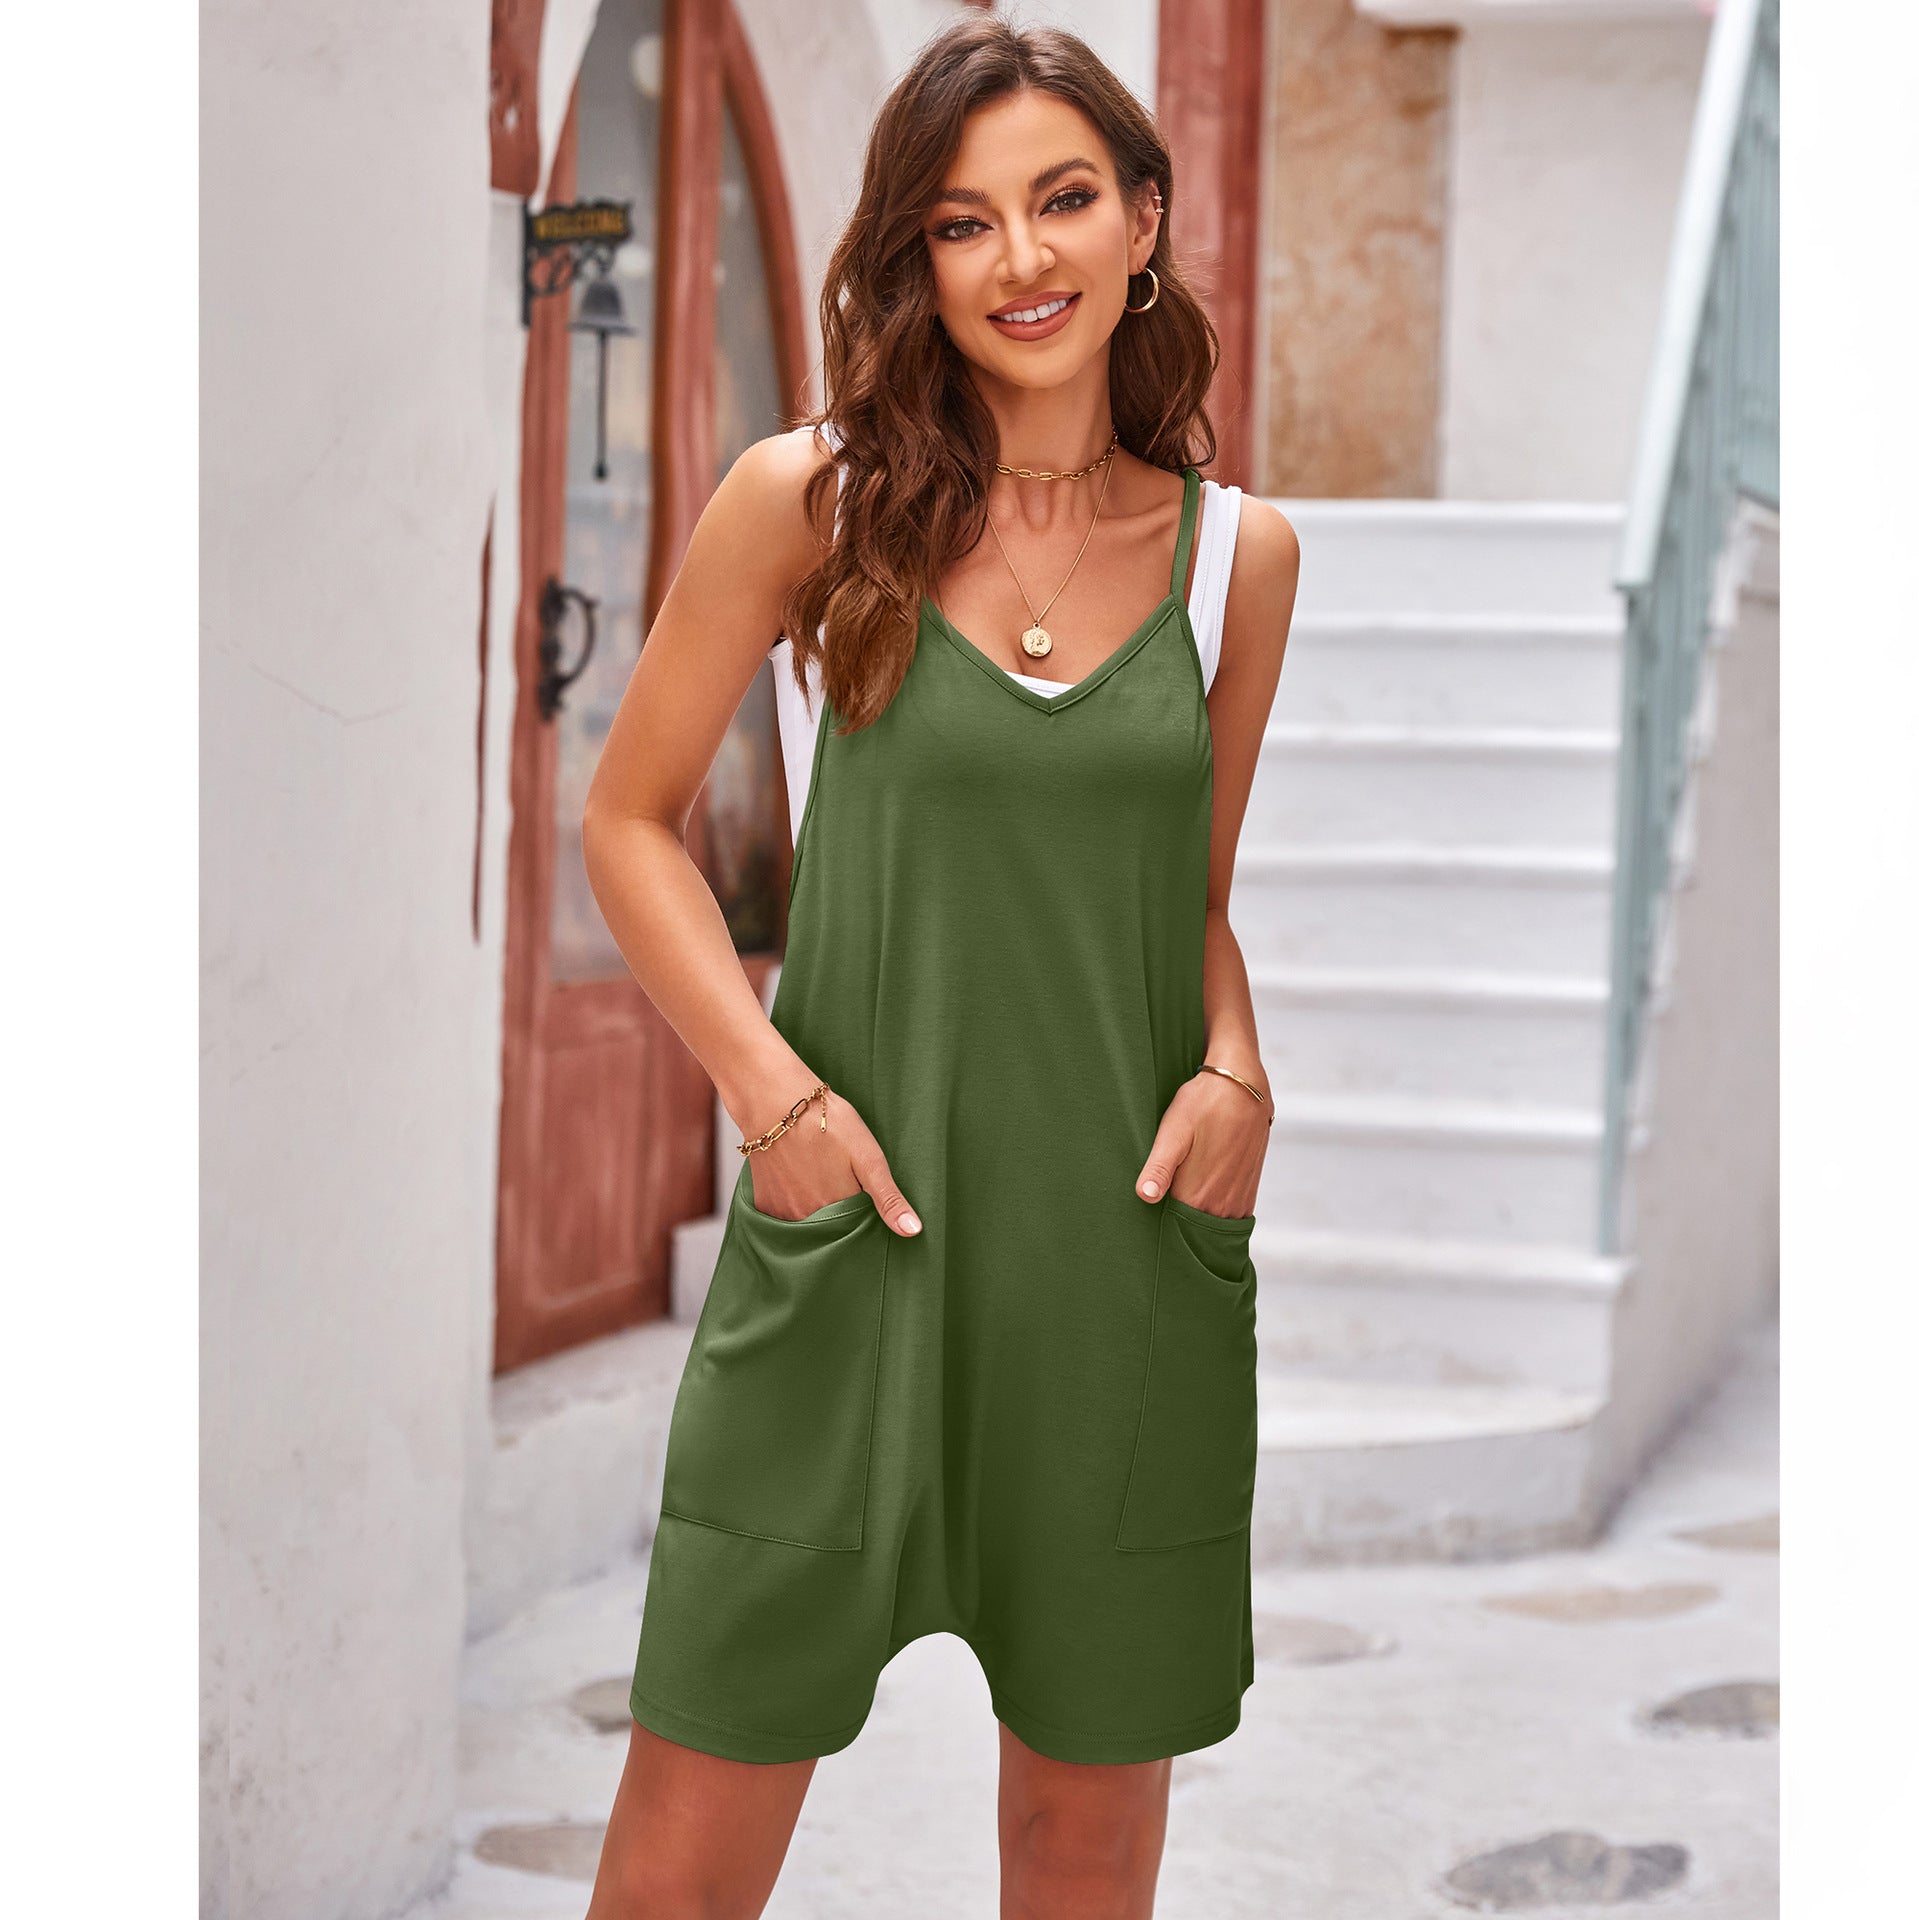 Women's Summer Casual Pocket Spaghetti Straps Knitted Jumpsuits